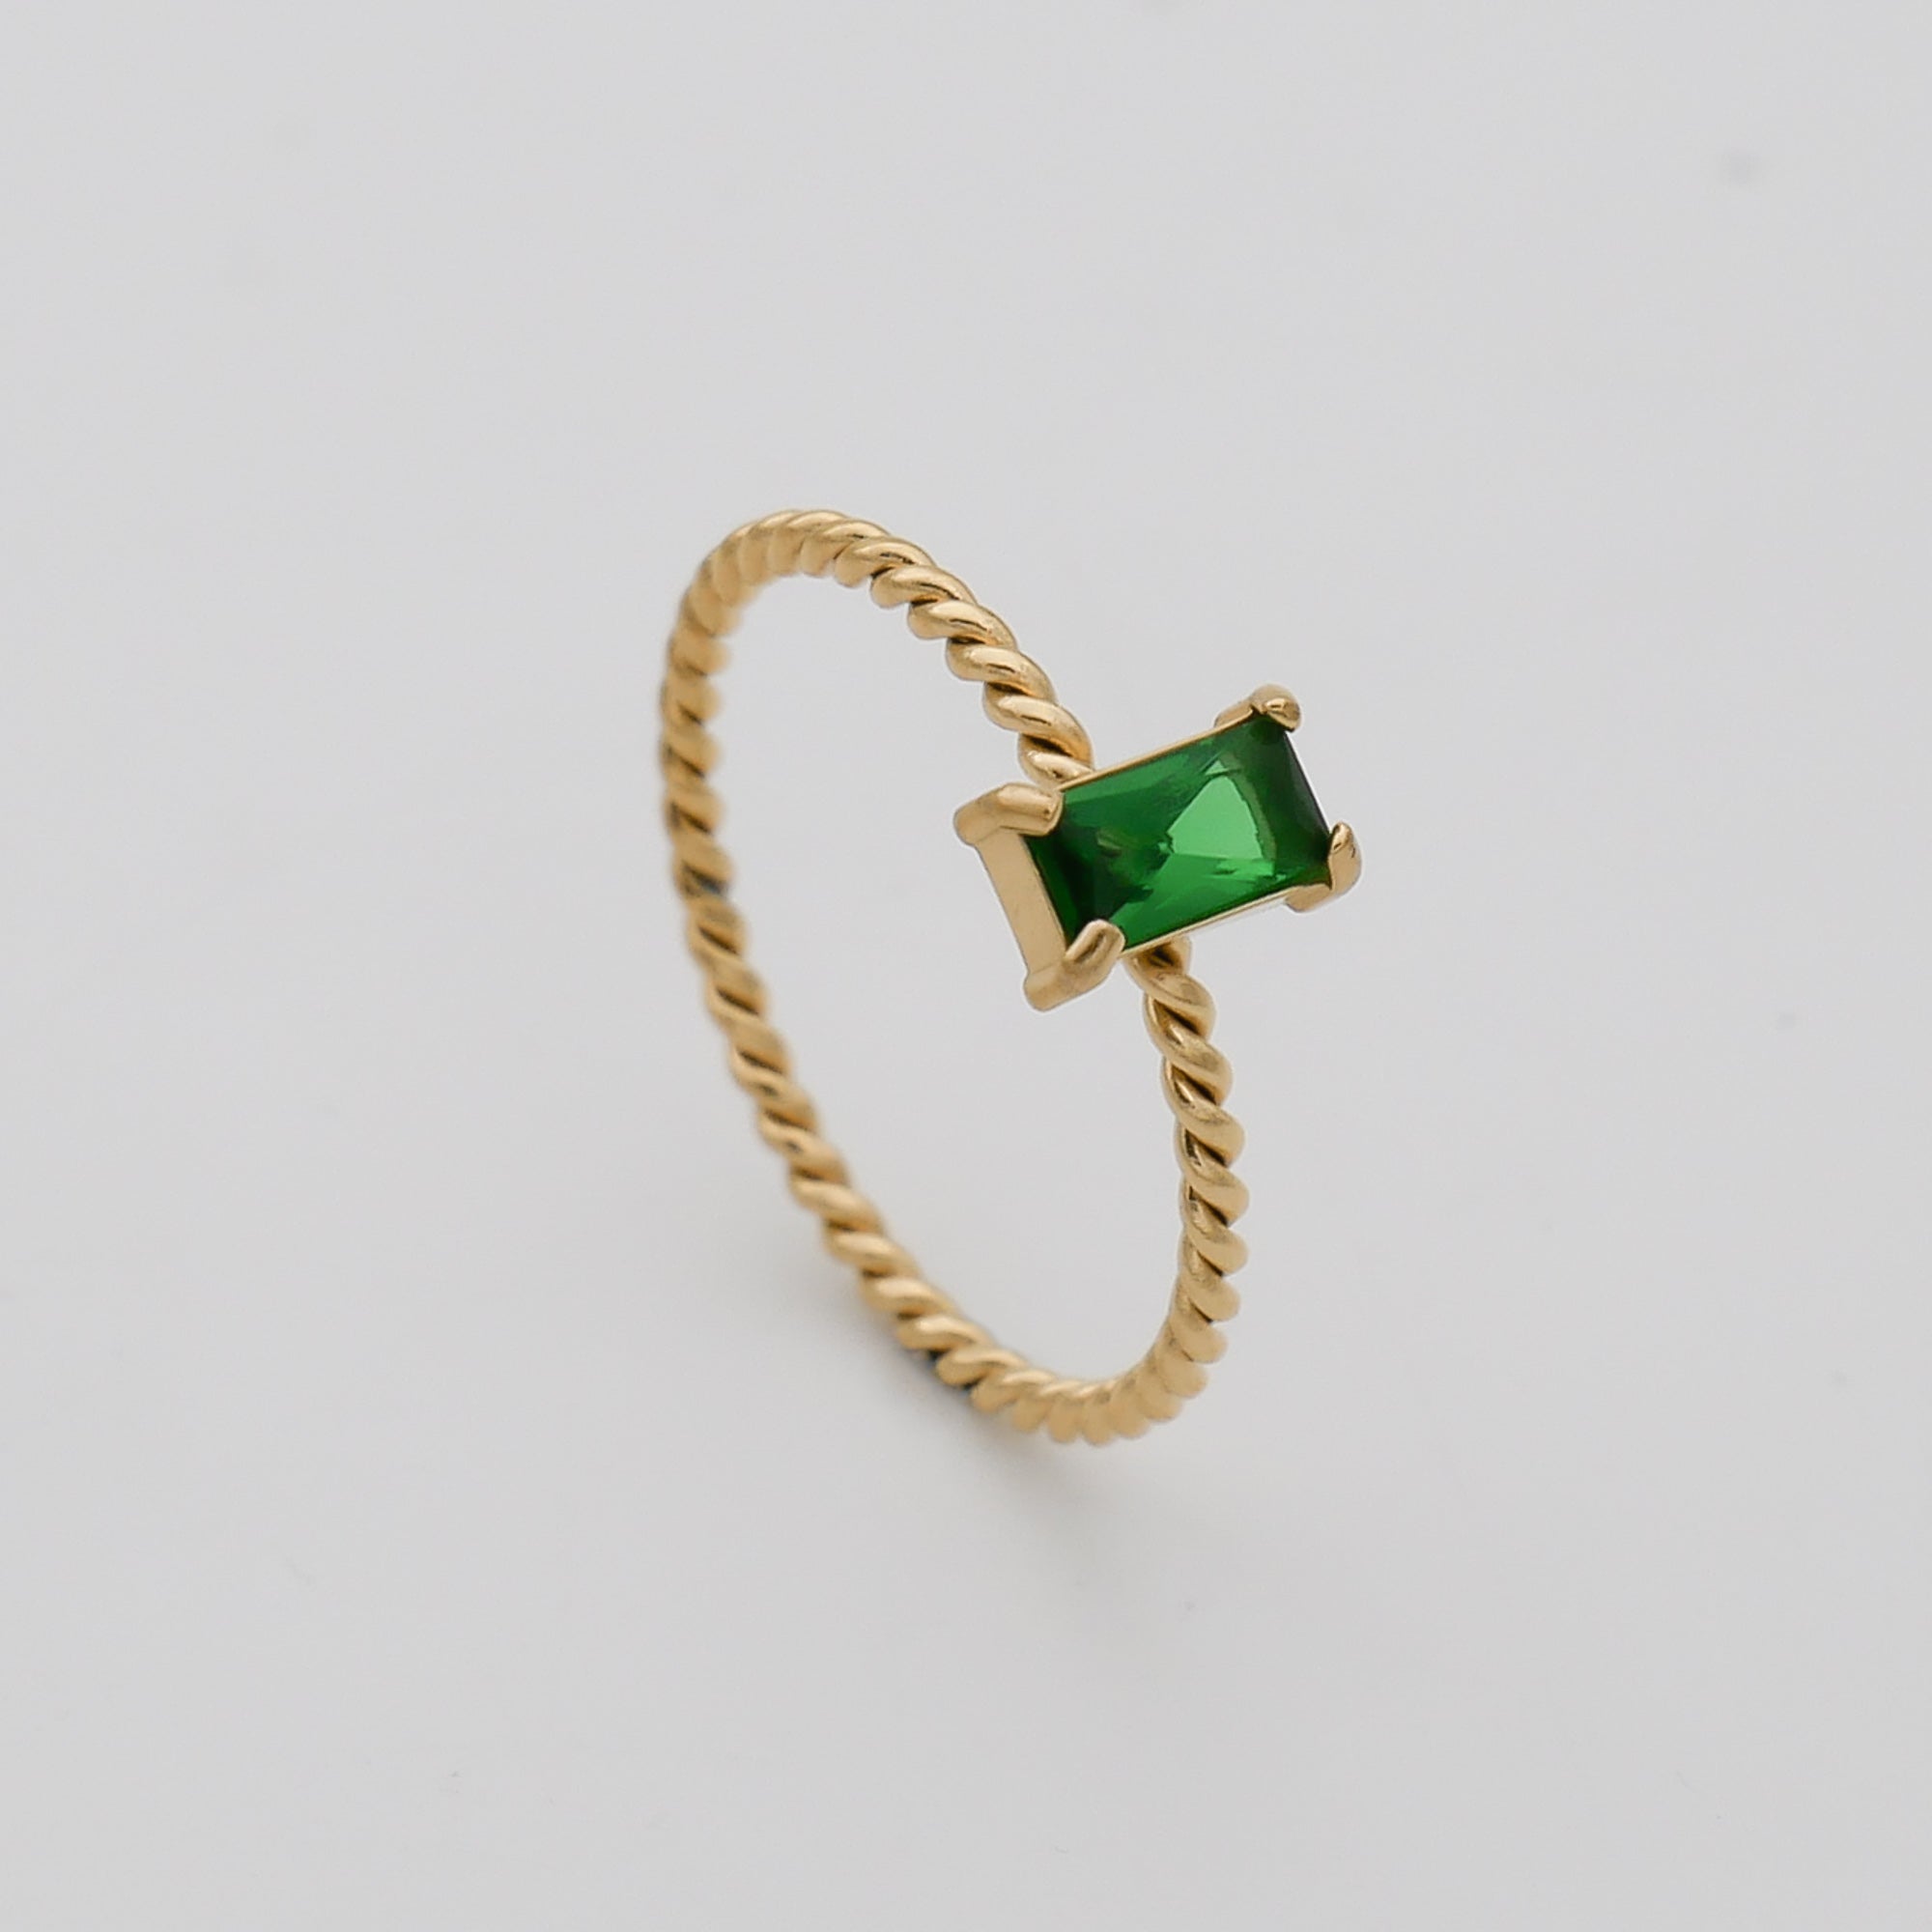 Selin twisted ring in emerald